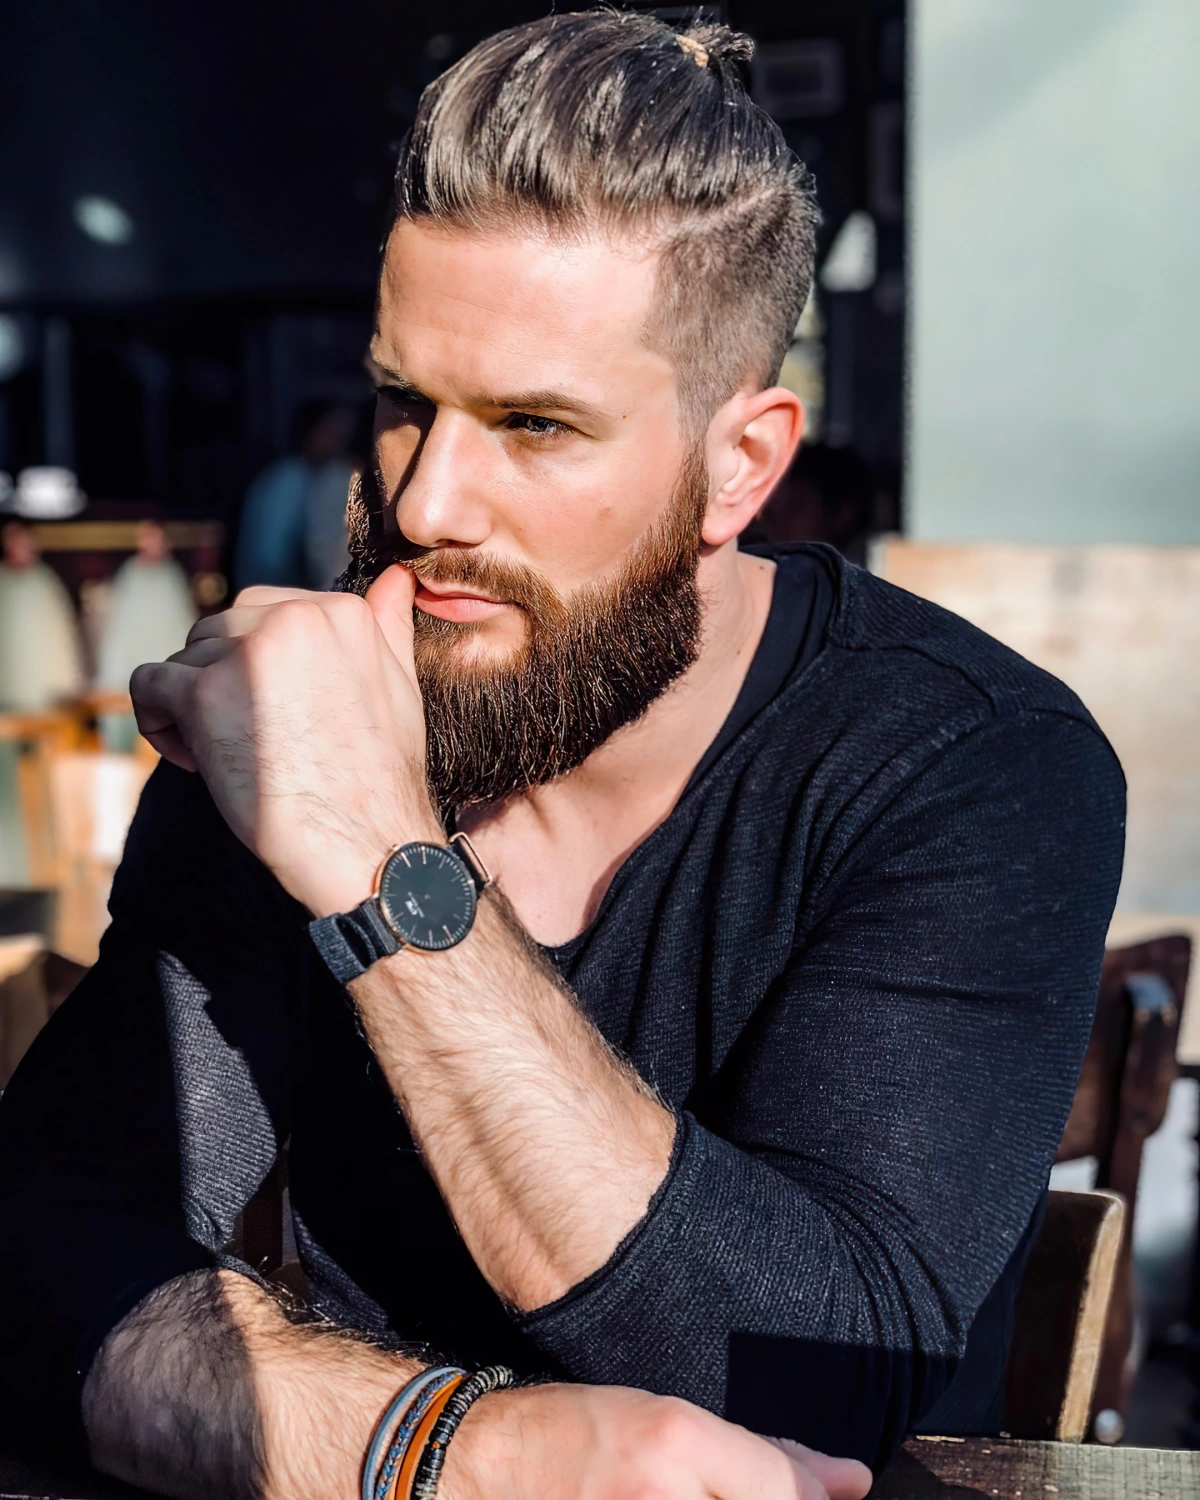 top knot homme cheveux tres courts taper cut degrade barbe